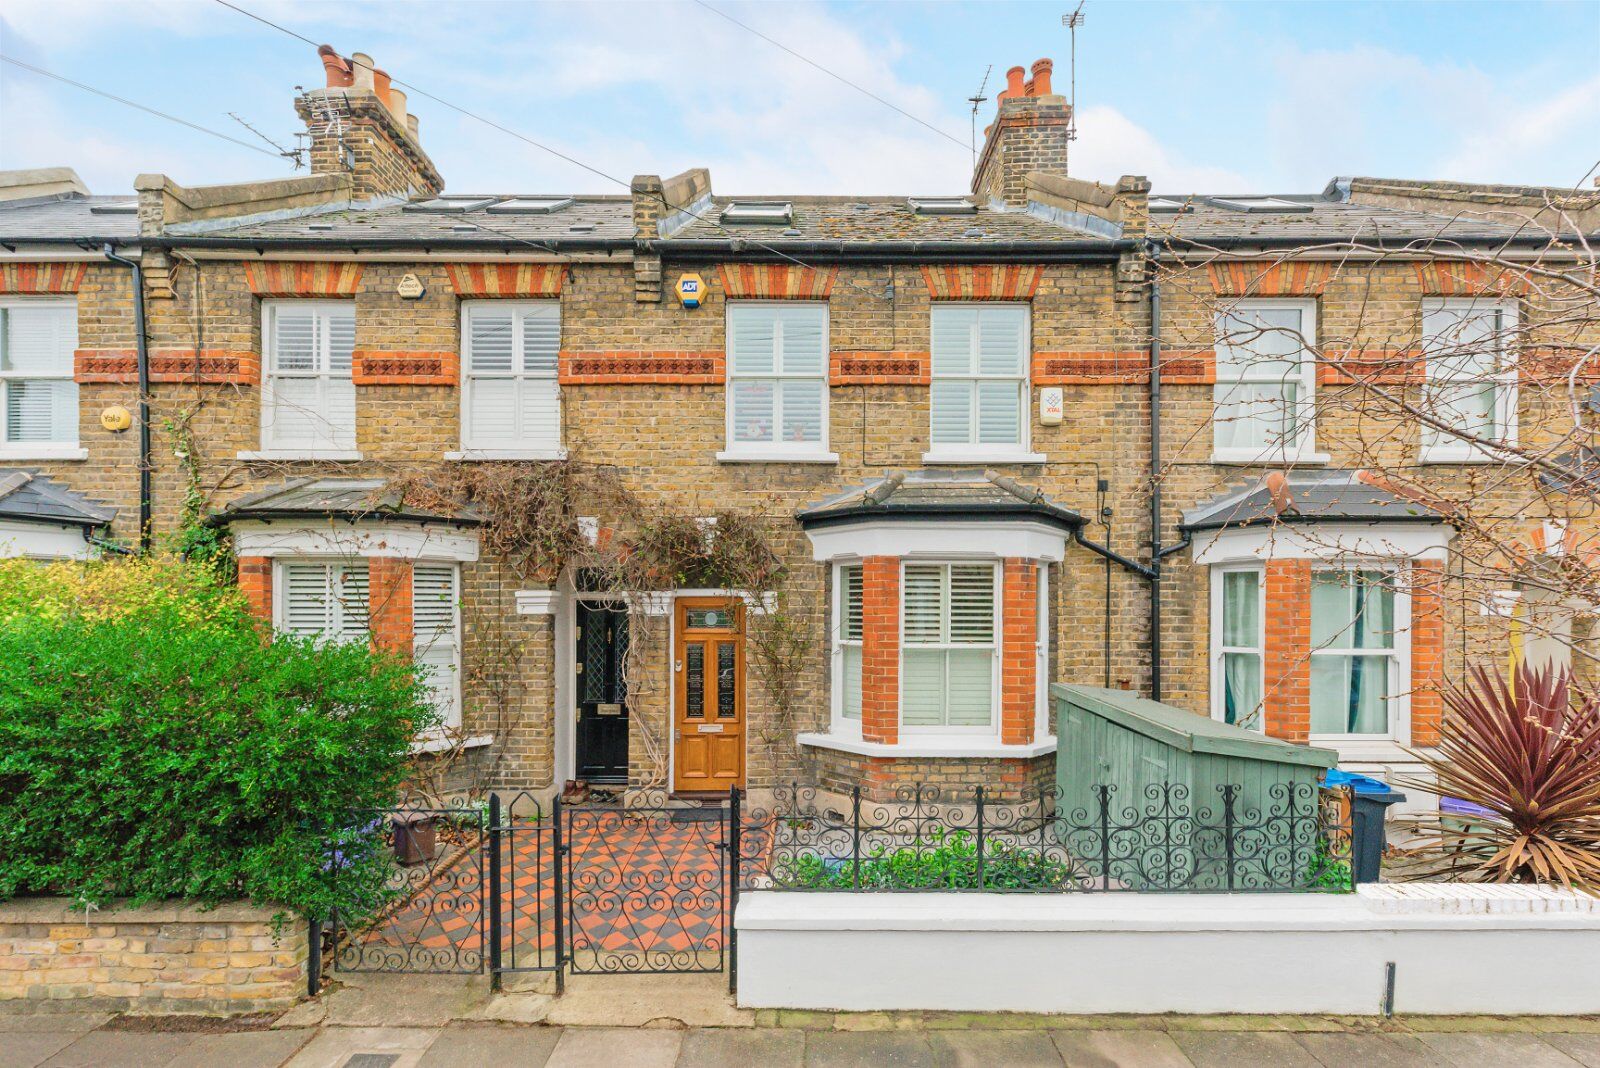 4 bedroom mid terraced house for sale Hardy Road, London, SW19, main image